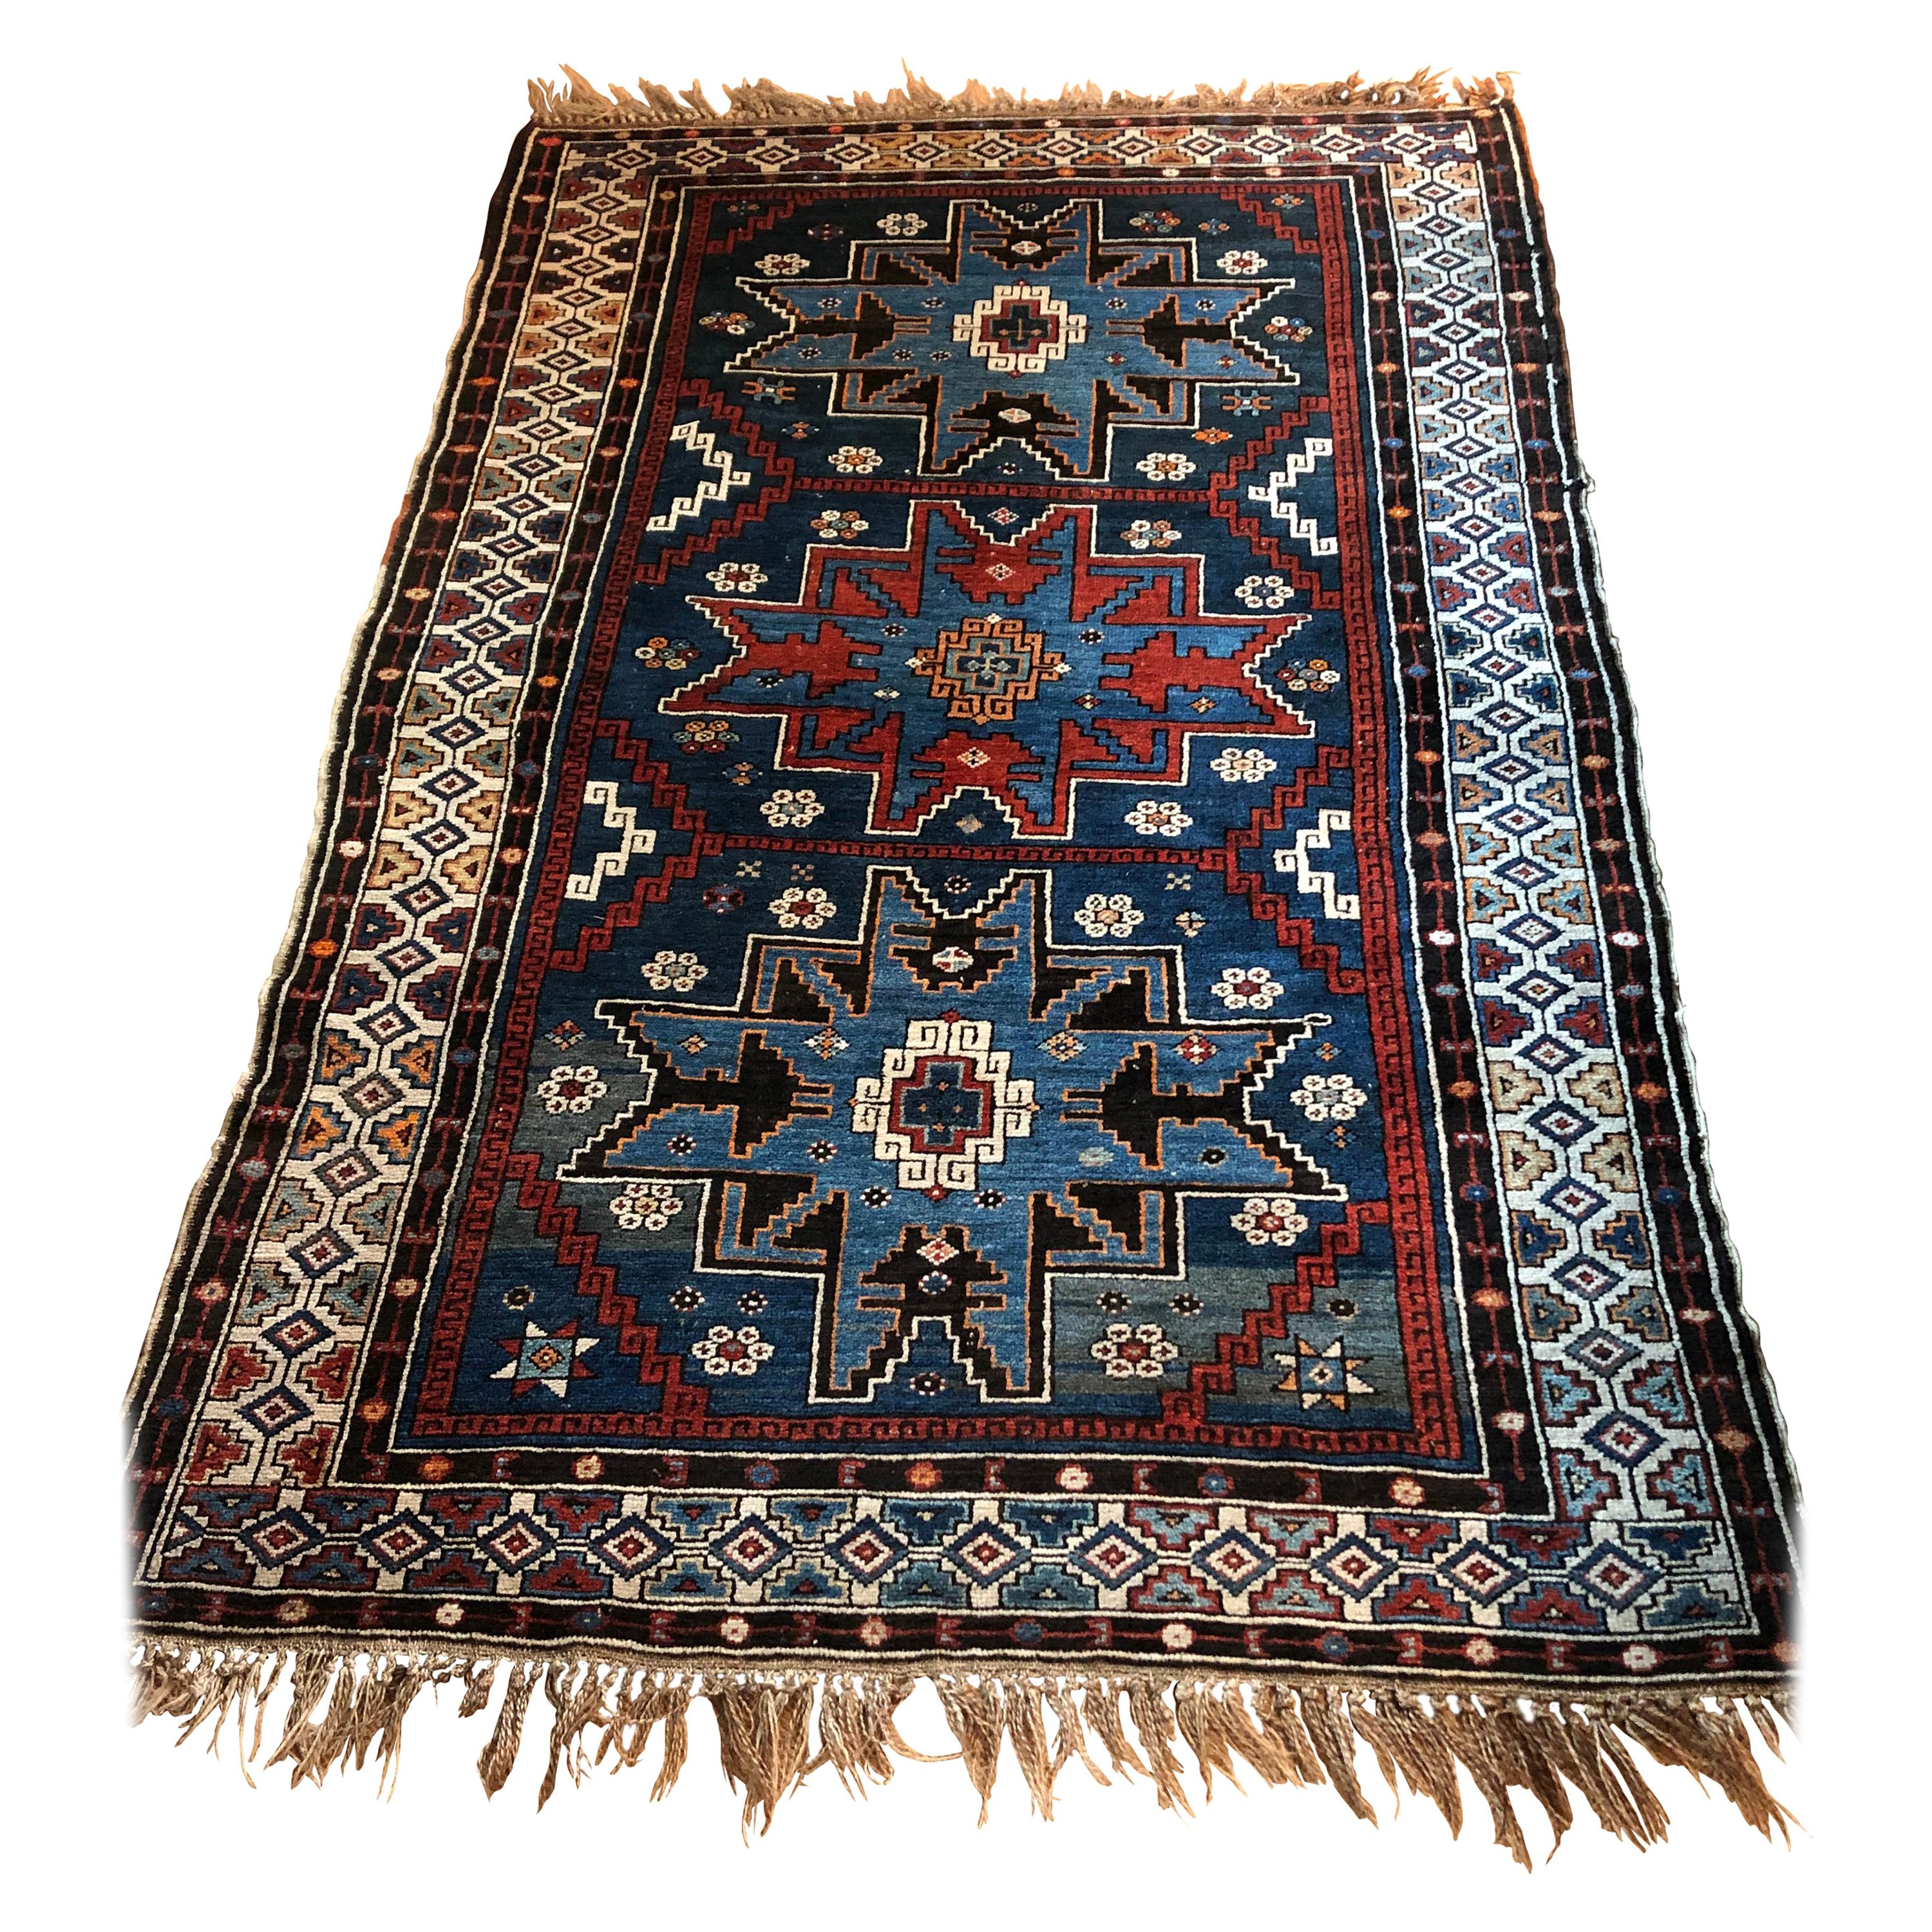 Richly Patterned Antique Area Rug in Blues and Cranberry